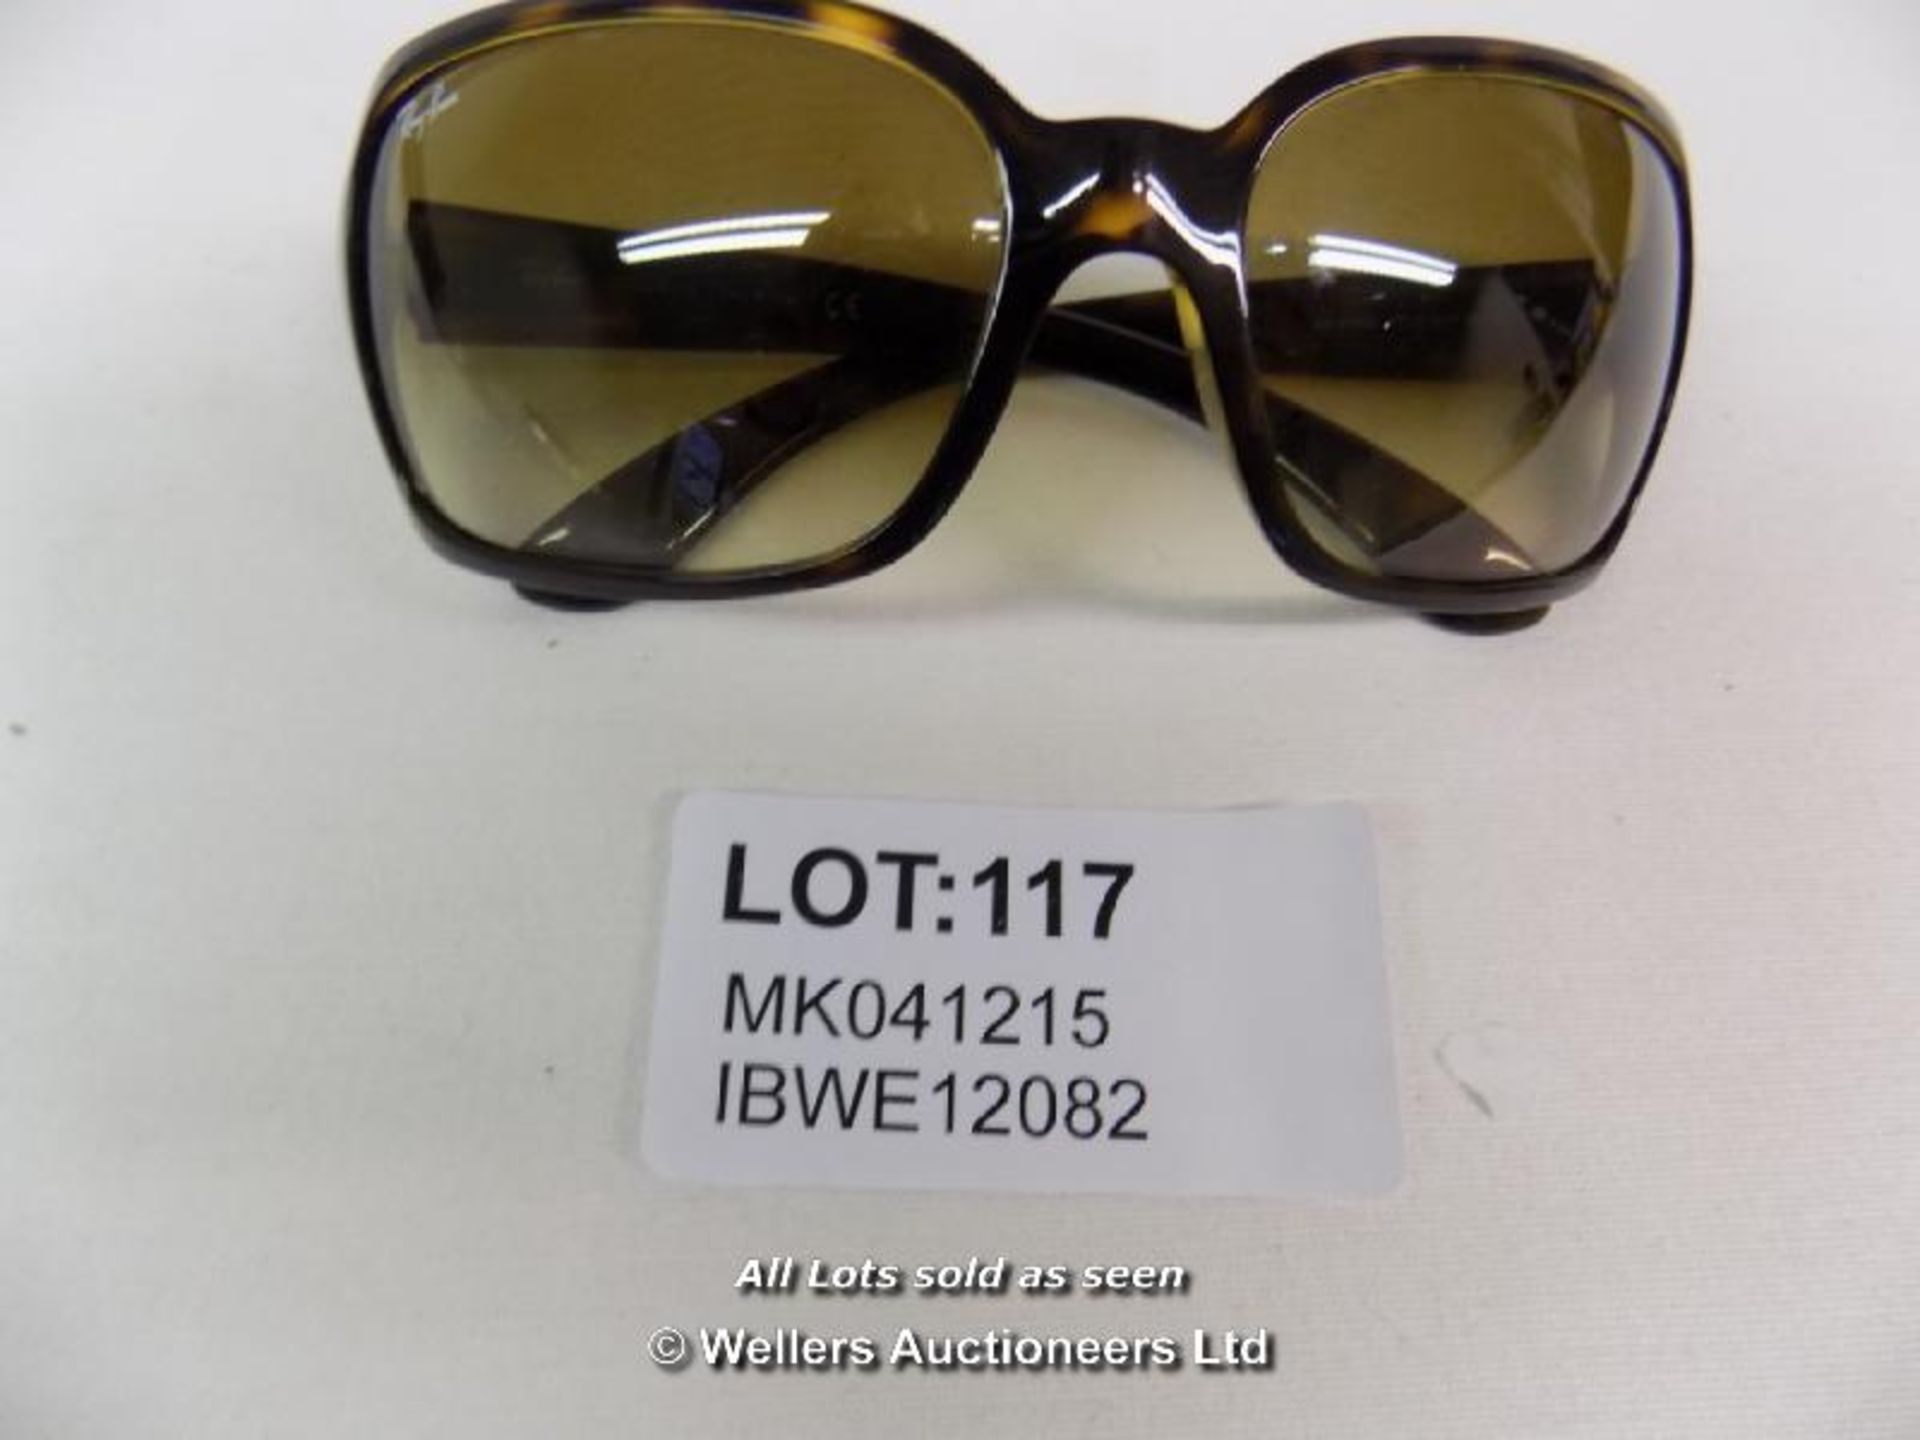 RAY-BAN SUNGLASSES / GRADE: UNCLAIMED PROPERTY / UNBOXED (DC2) {MK041215}